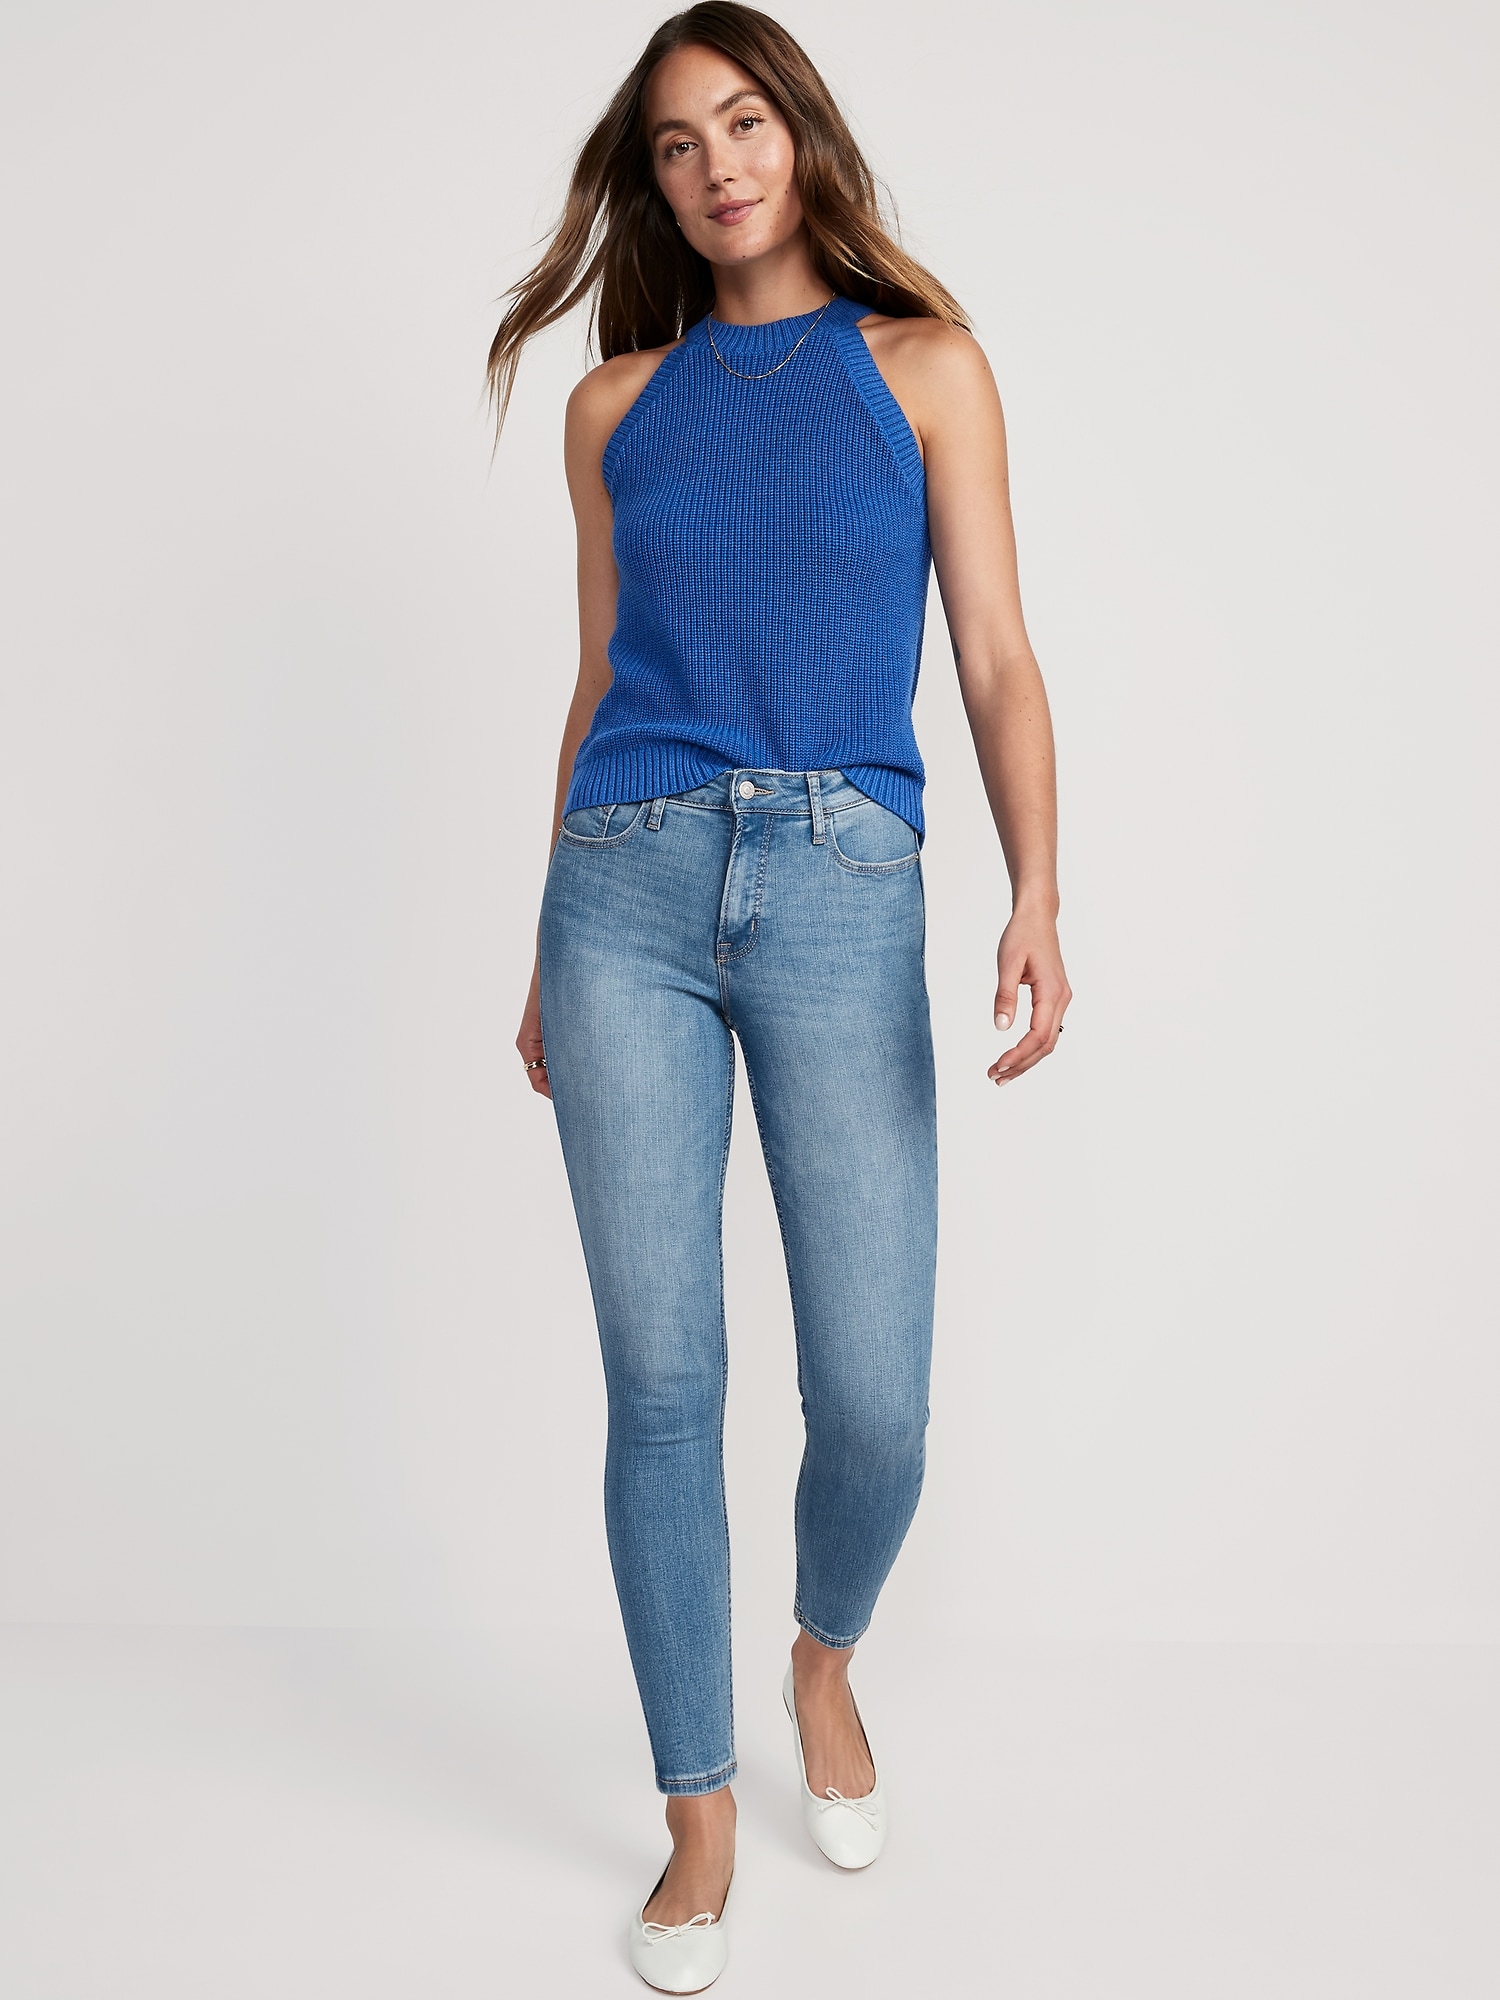 The Diva Jeans | Old Navy